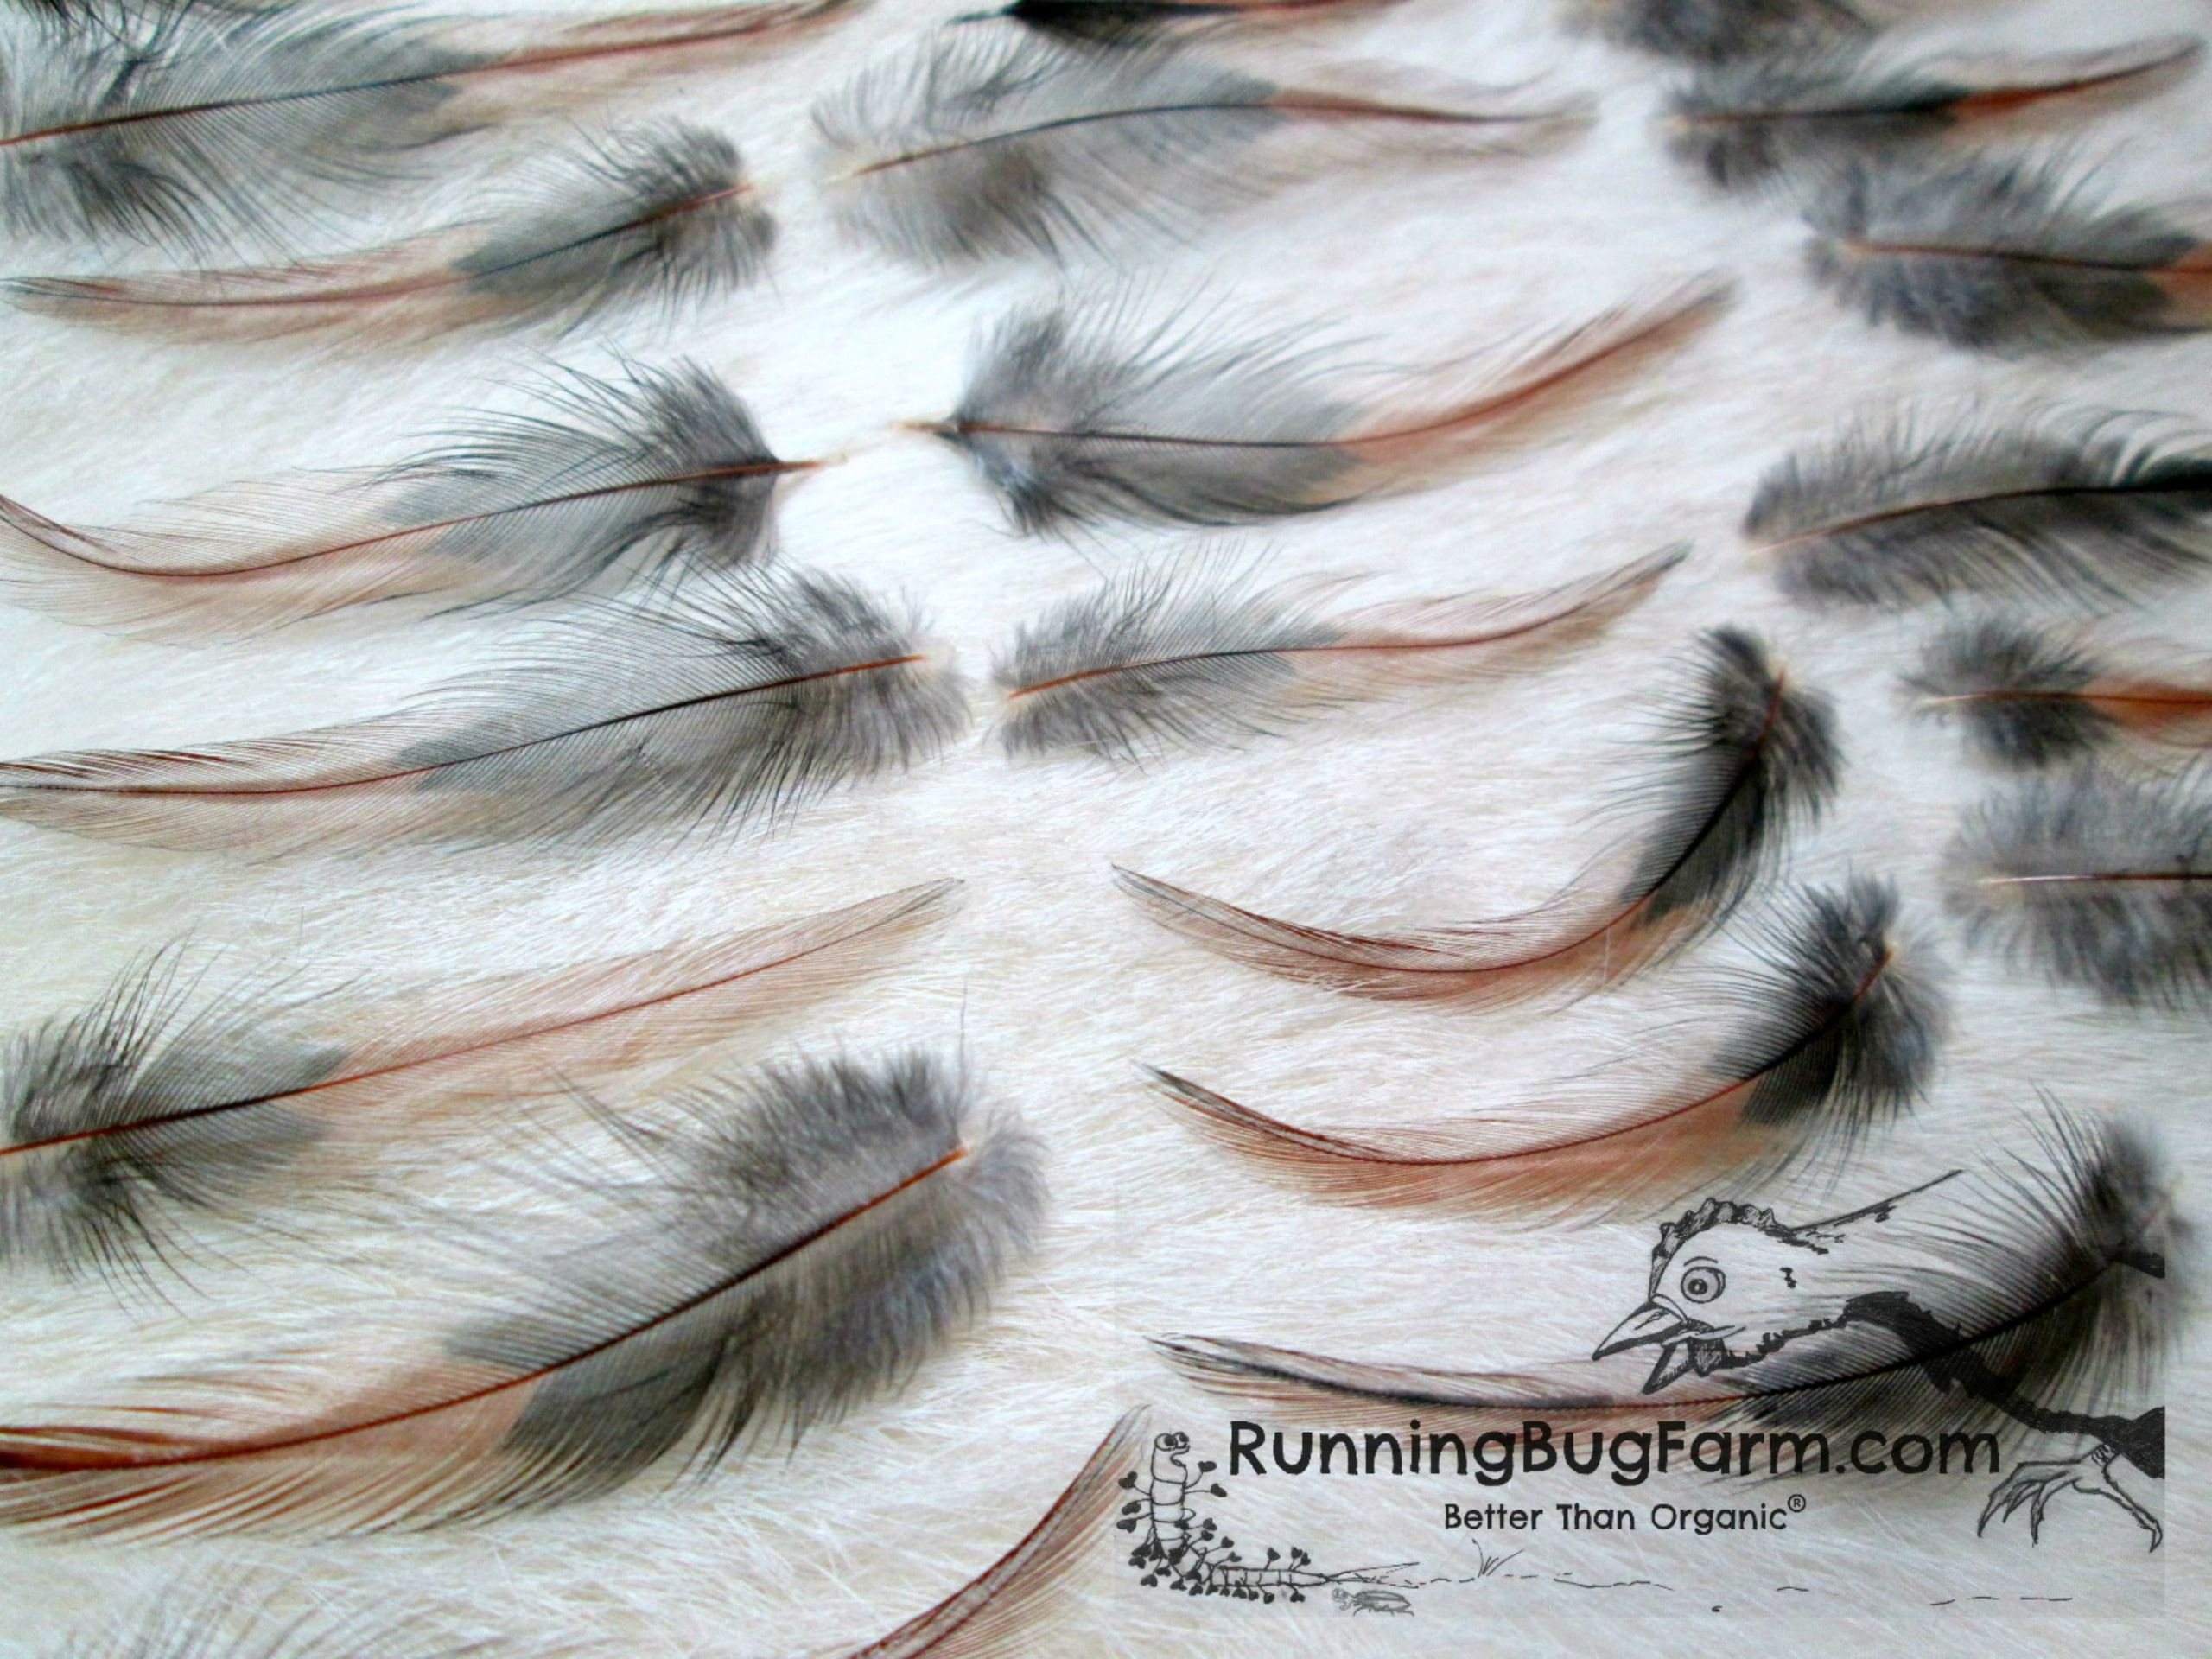 Small and Slender Black Laced Red Rooster Hackle Feathers for Crafts